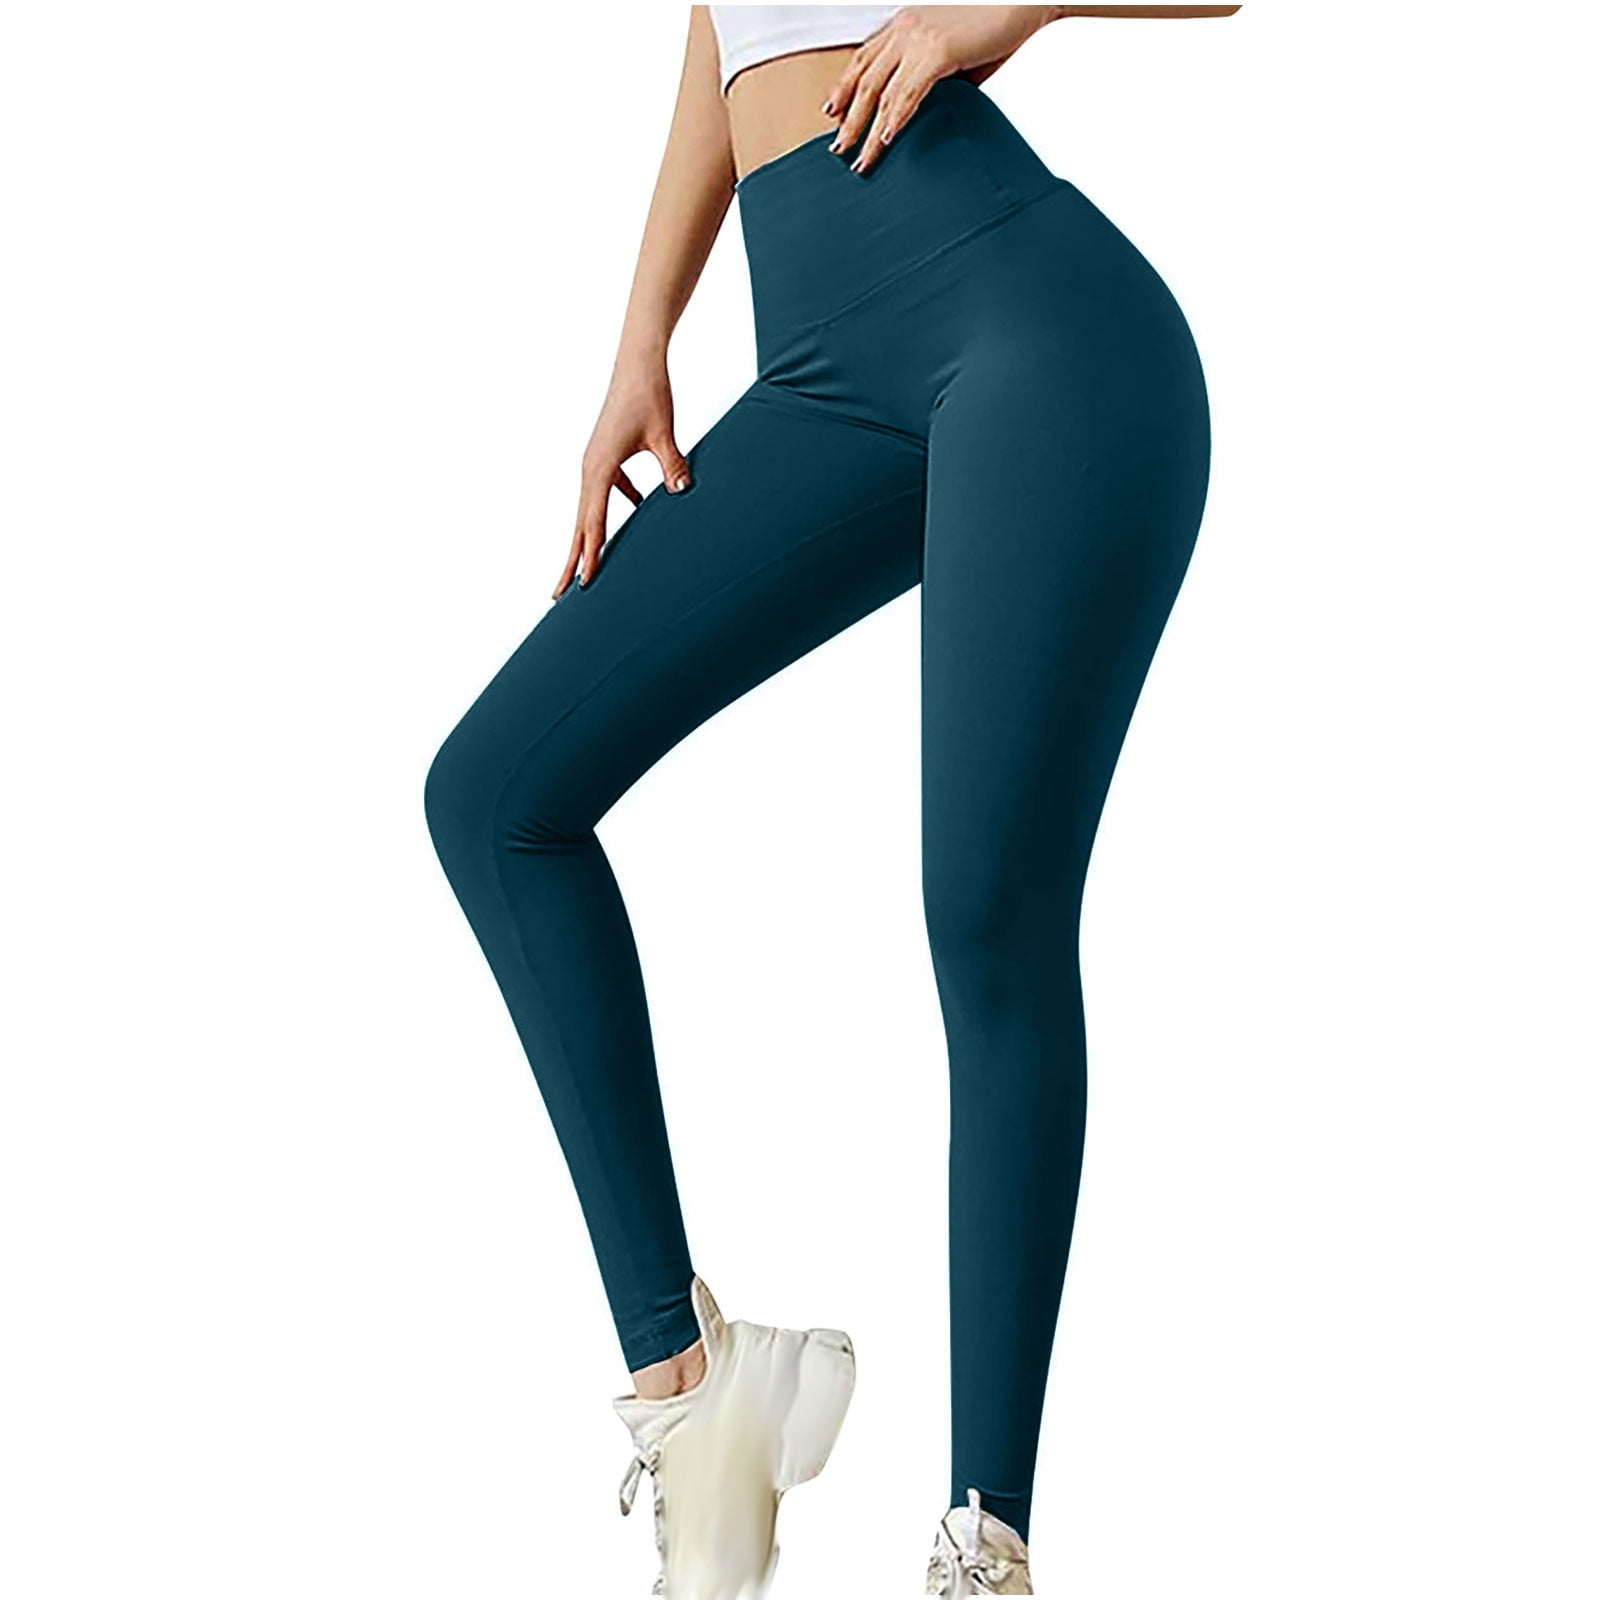 High Waist Bowknot Yoga Grey Gym Leggings With Scrunch Butt Support For  Women Perfect For Fitness, Gym, Running And Workouts 201202 From Mu02,  $21.09